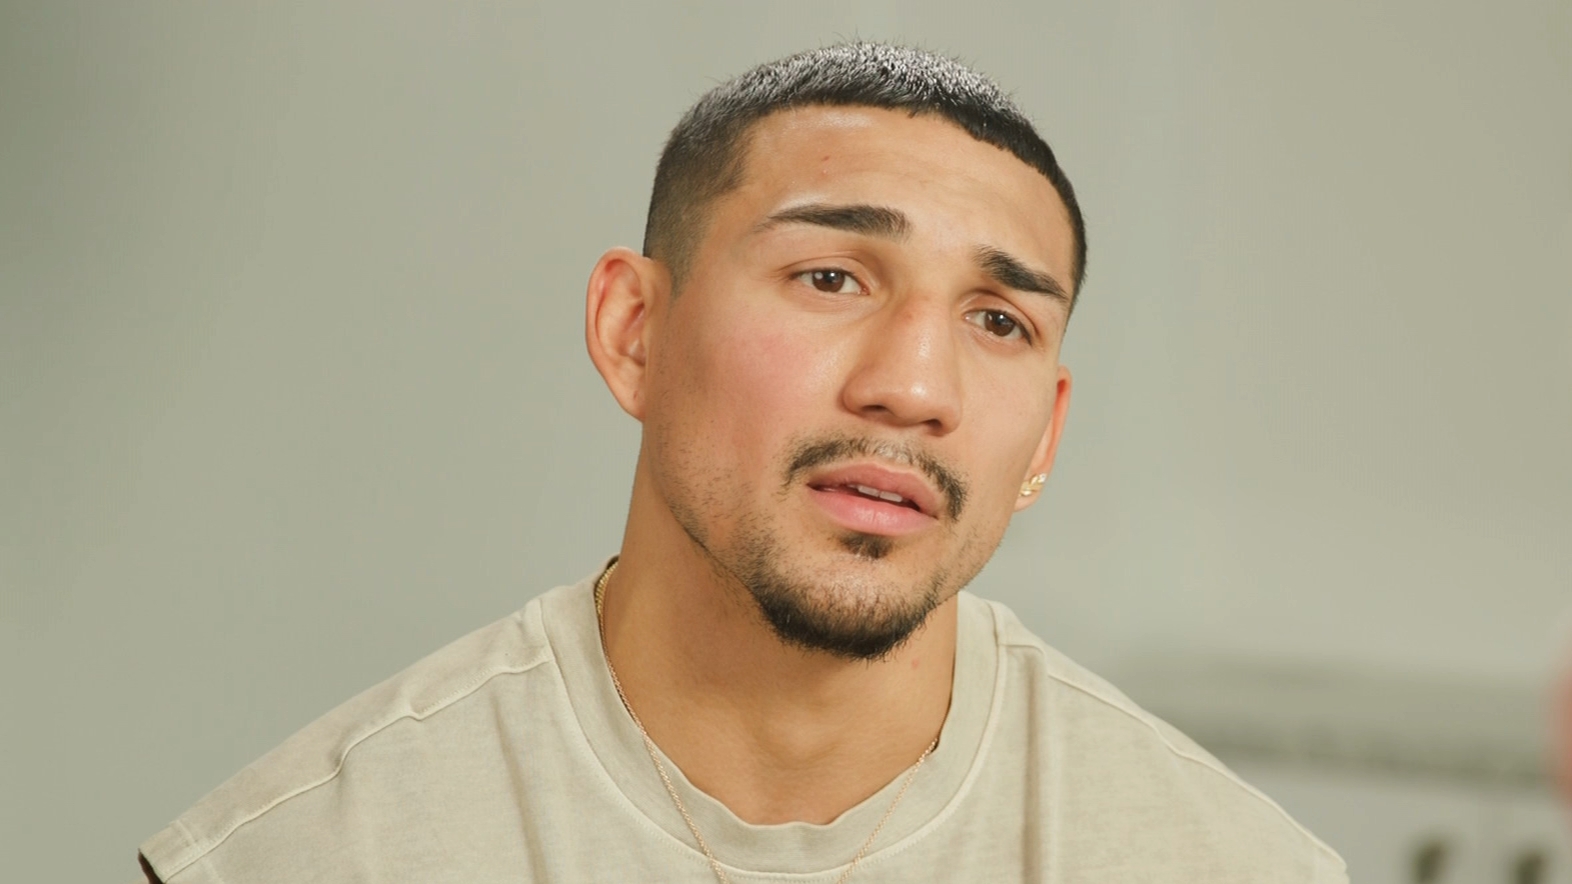 Teofimo Lopez addresses controversial comments in lead-up to Josh Taylor bout - Stream the Video